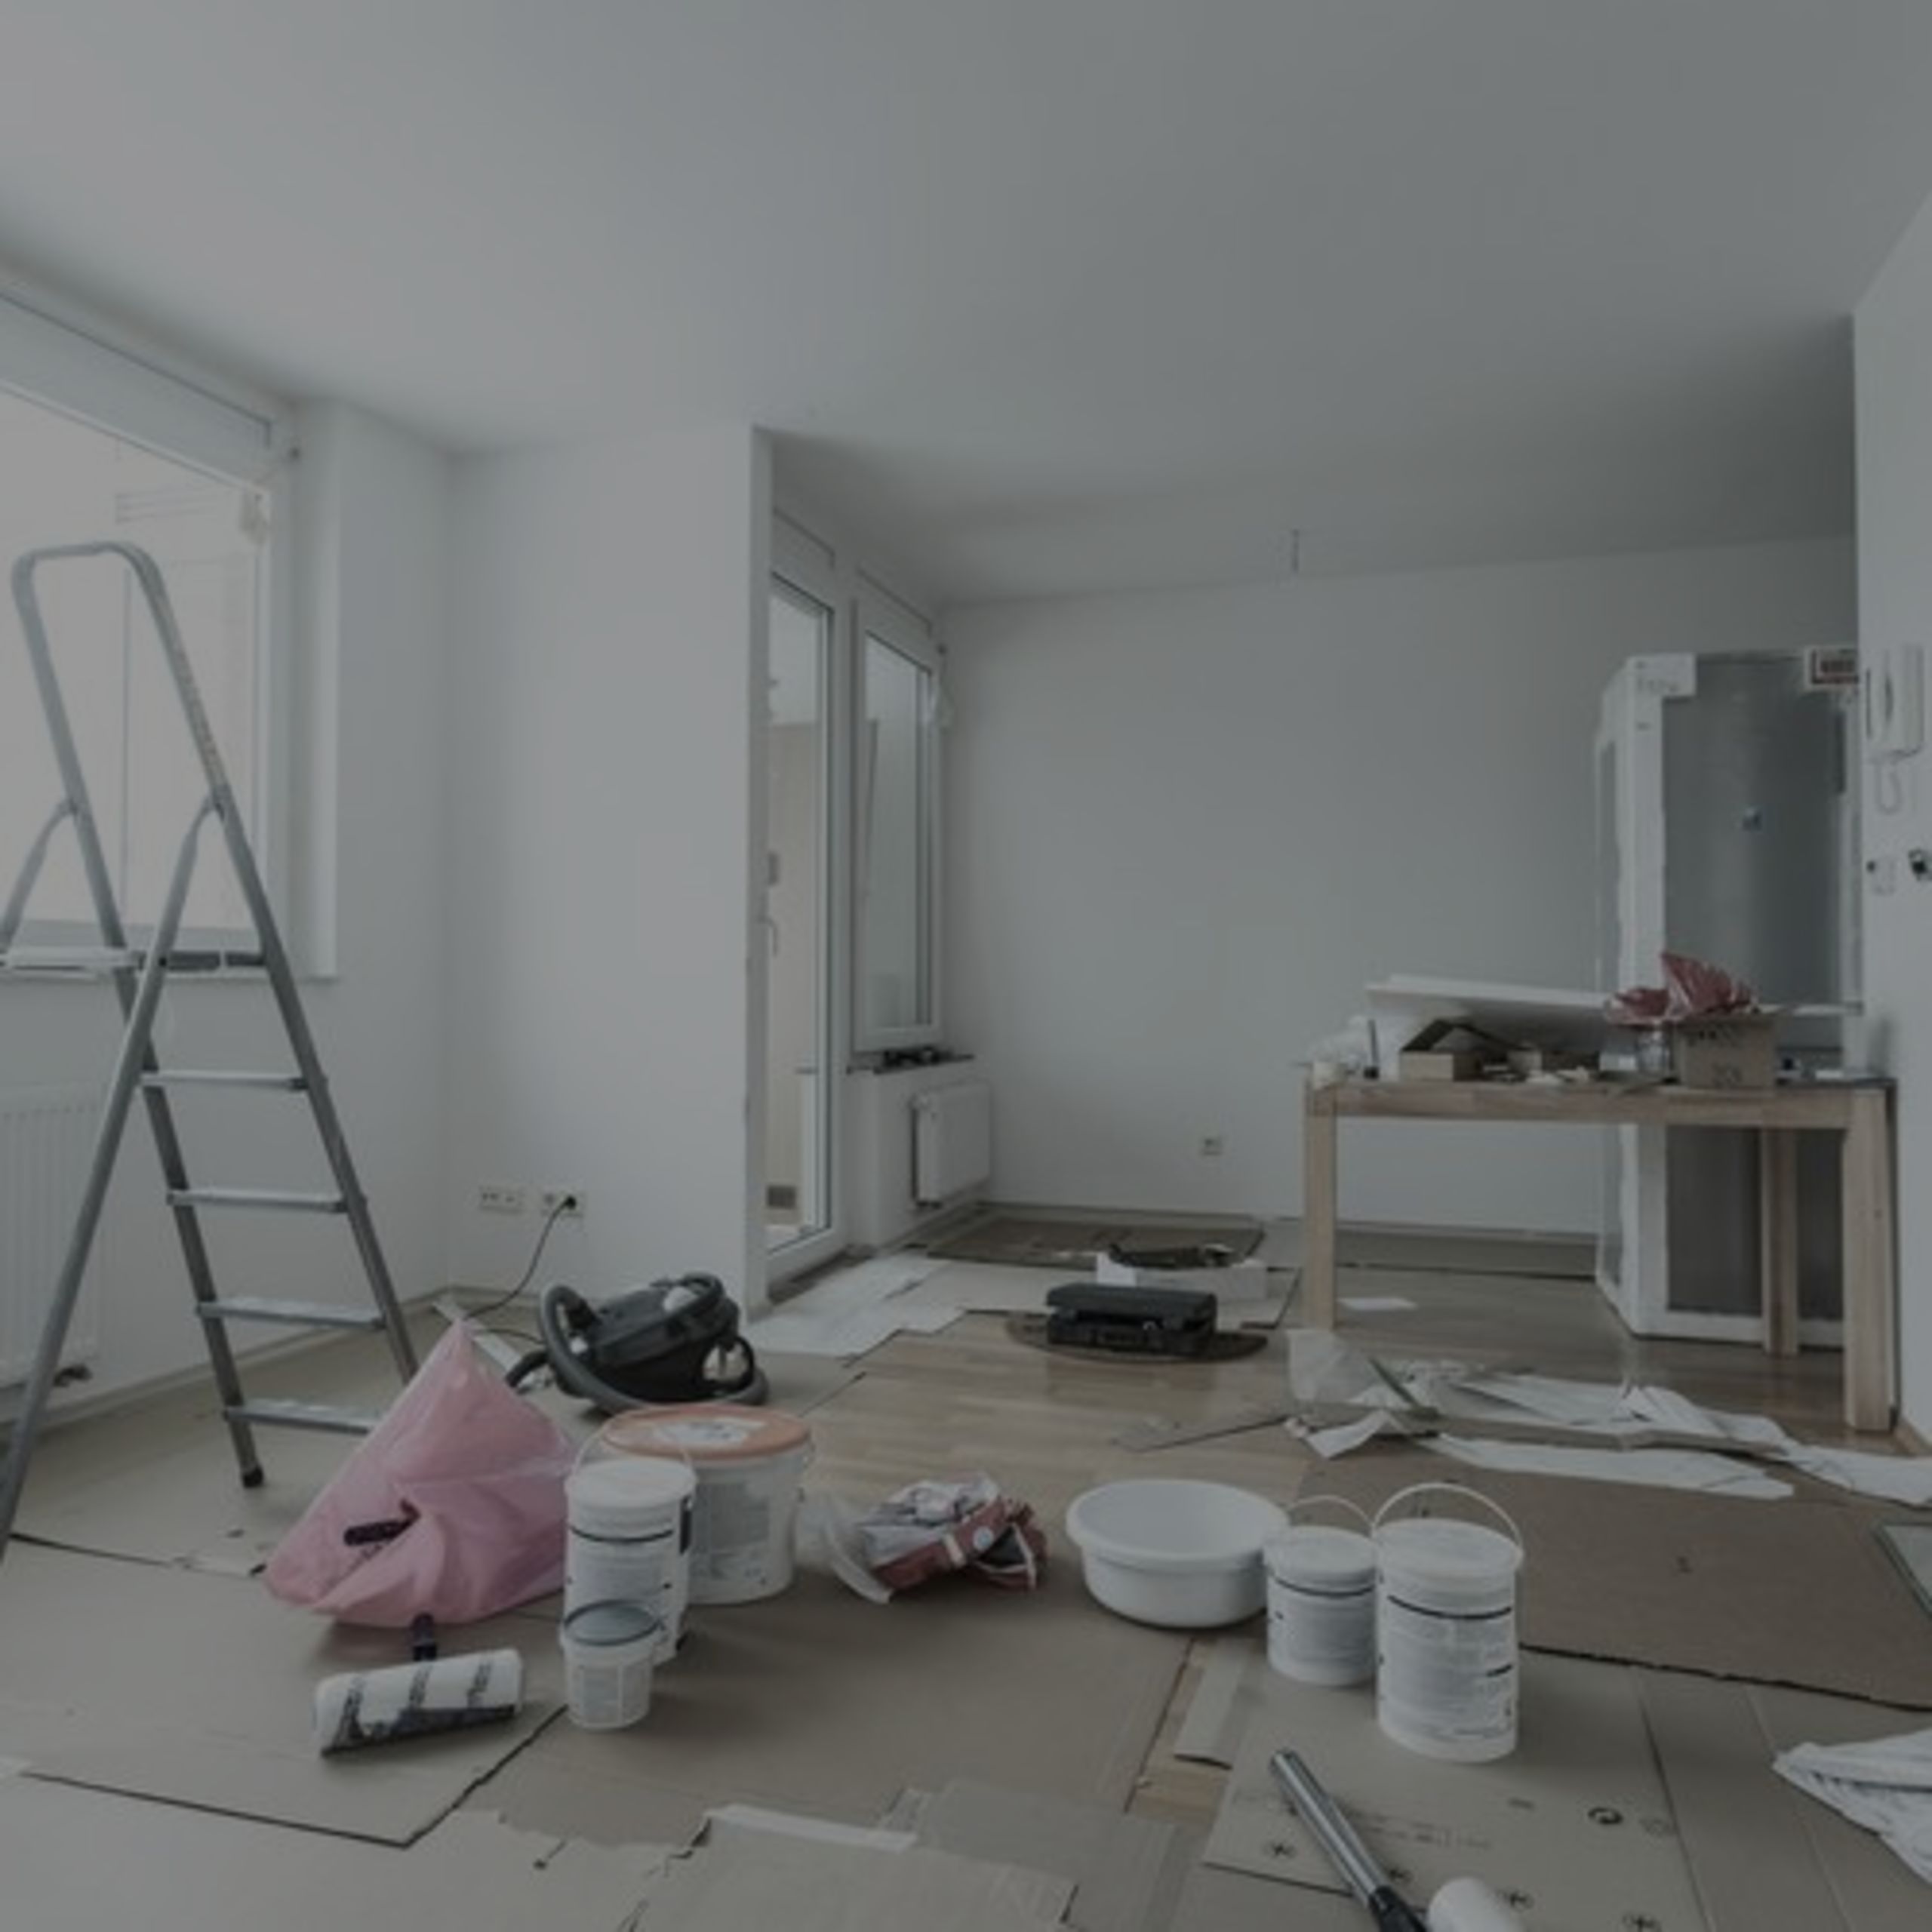 8 Home Renovation Trends That Could Hurt Future Sales